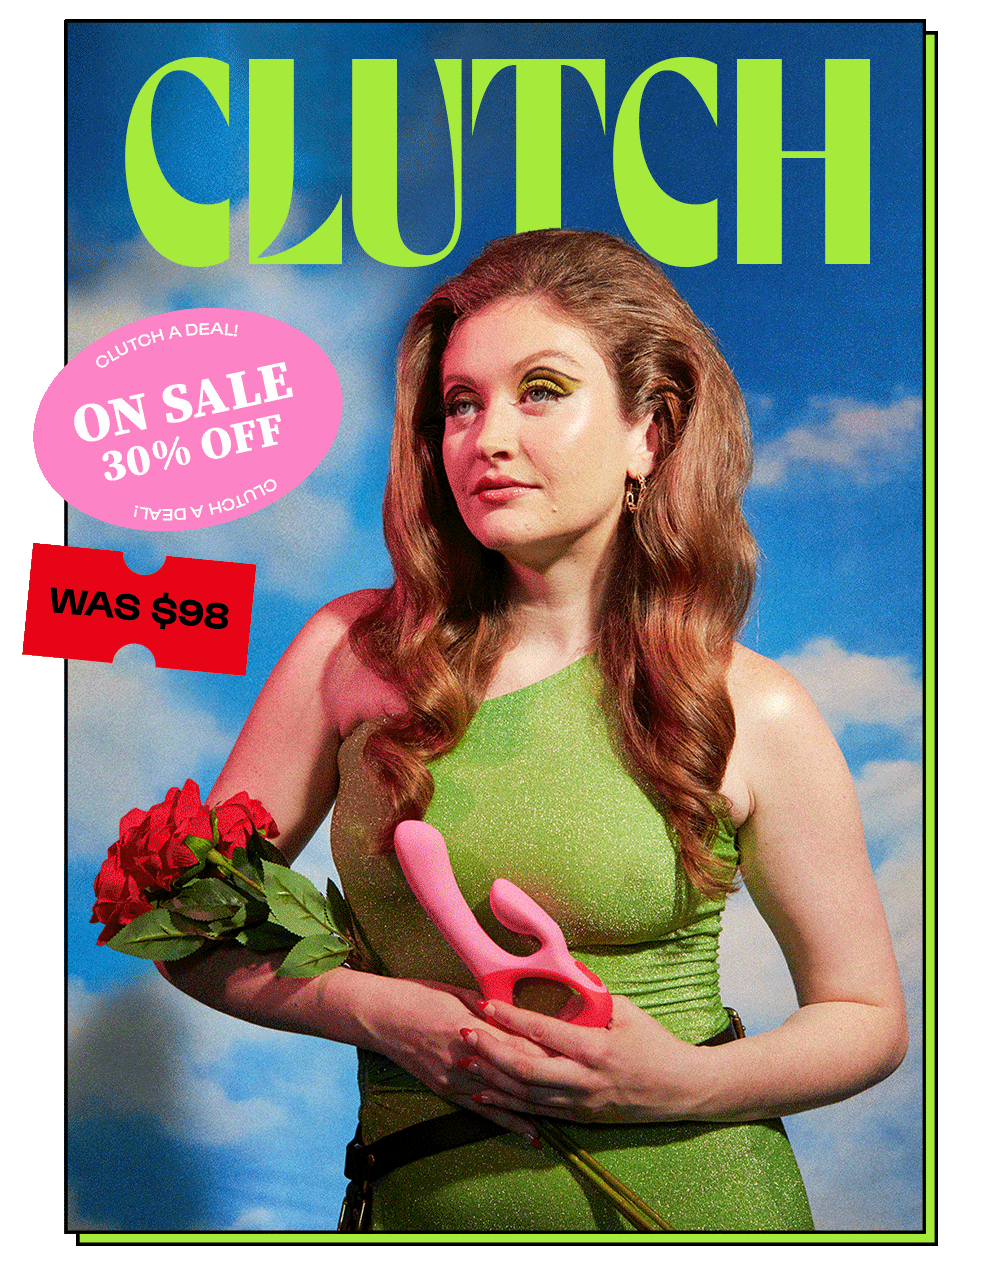 Clutch now 30% off